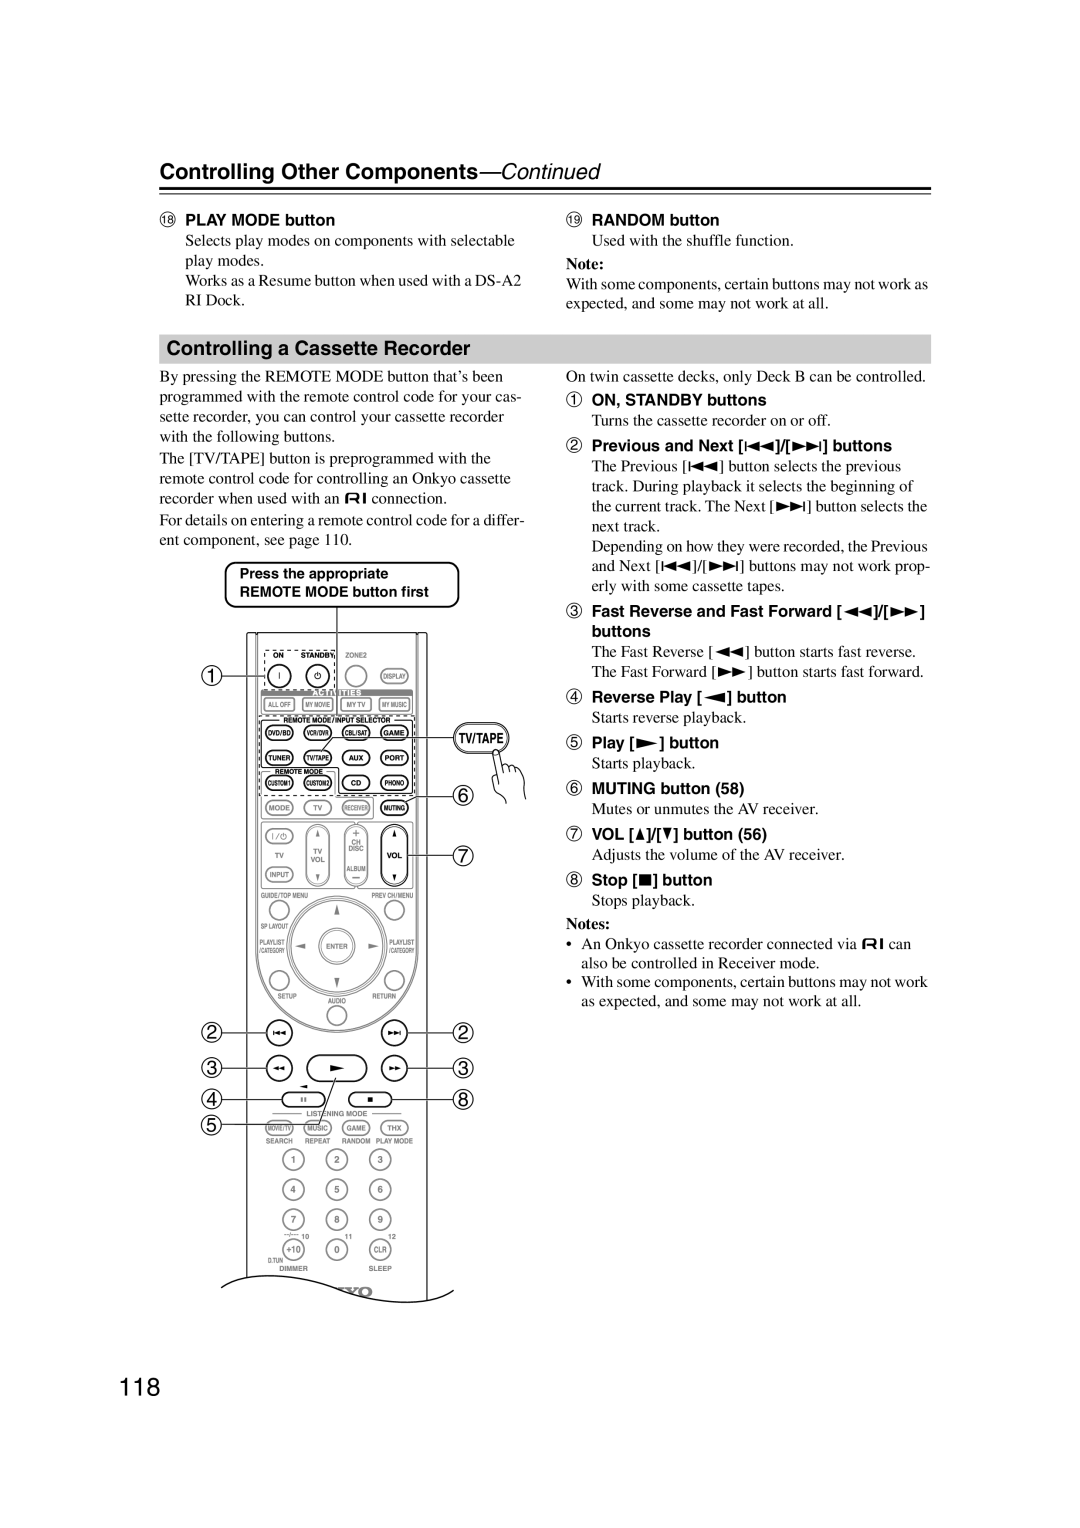 Onkyo TX-SR707 instruction manual Controlling a Cassette Recorder, Controlling Other Components-Continued 